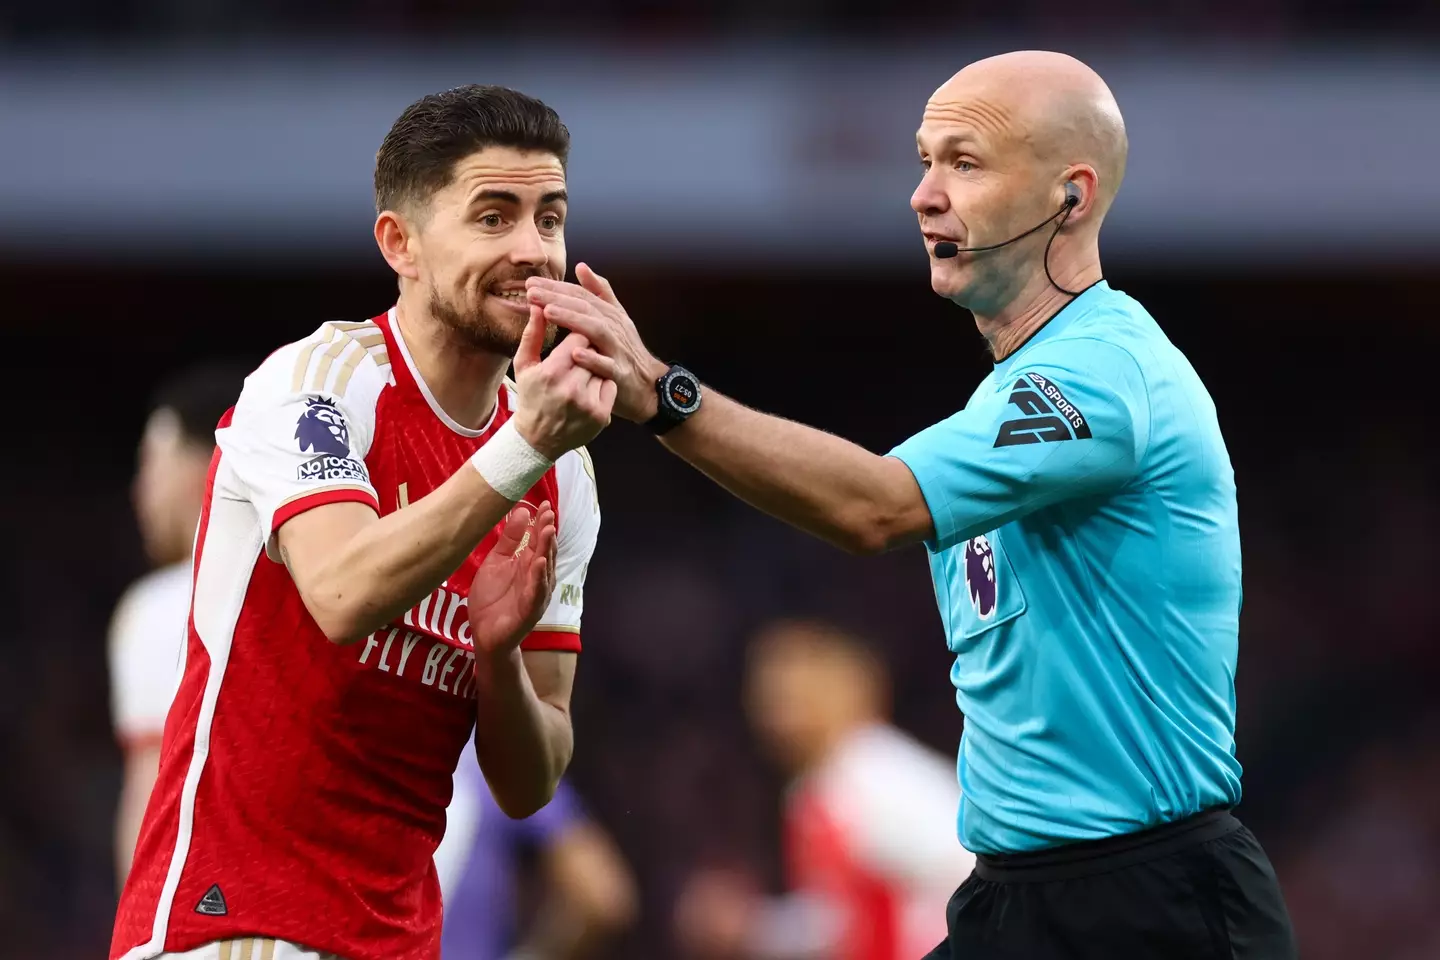 Anthony Taylor will take charge of Man City vs Arsenal. (Image: Getty)